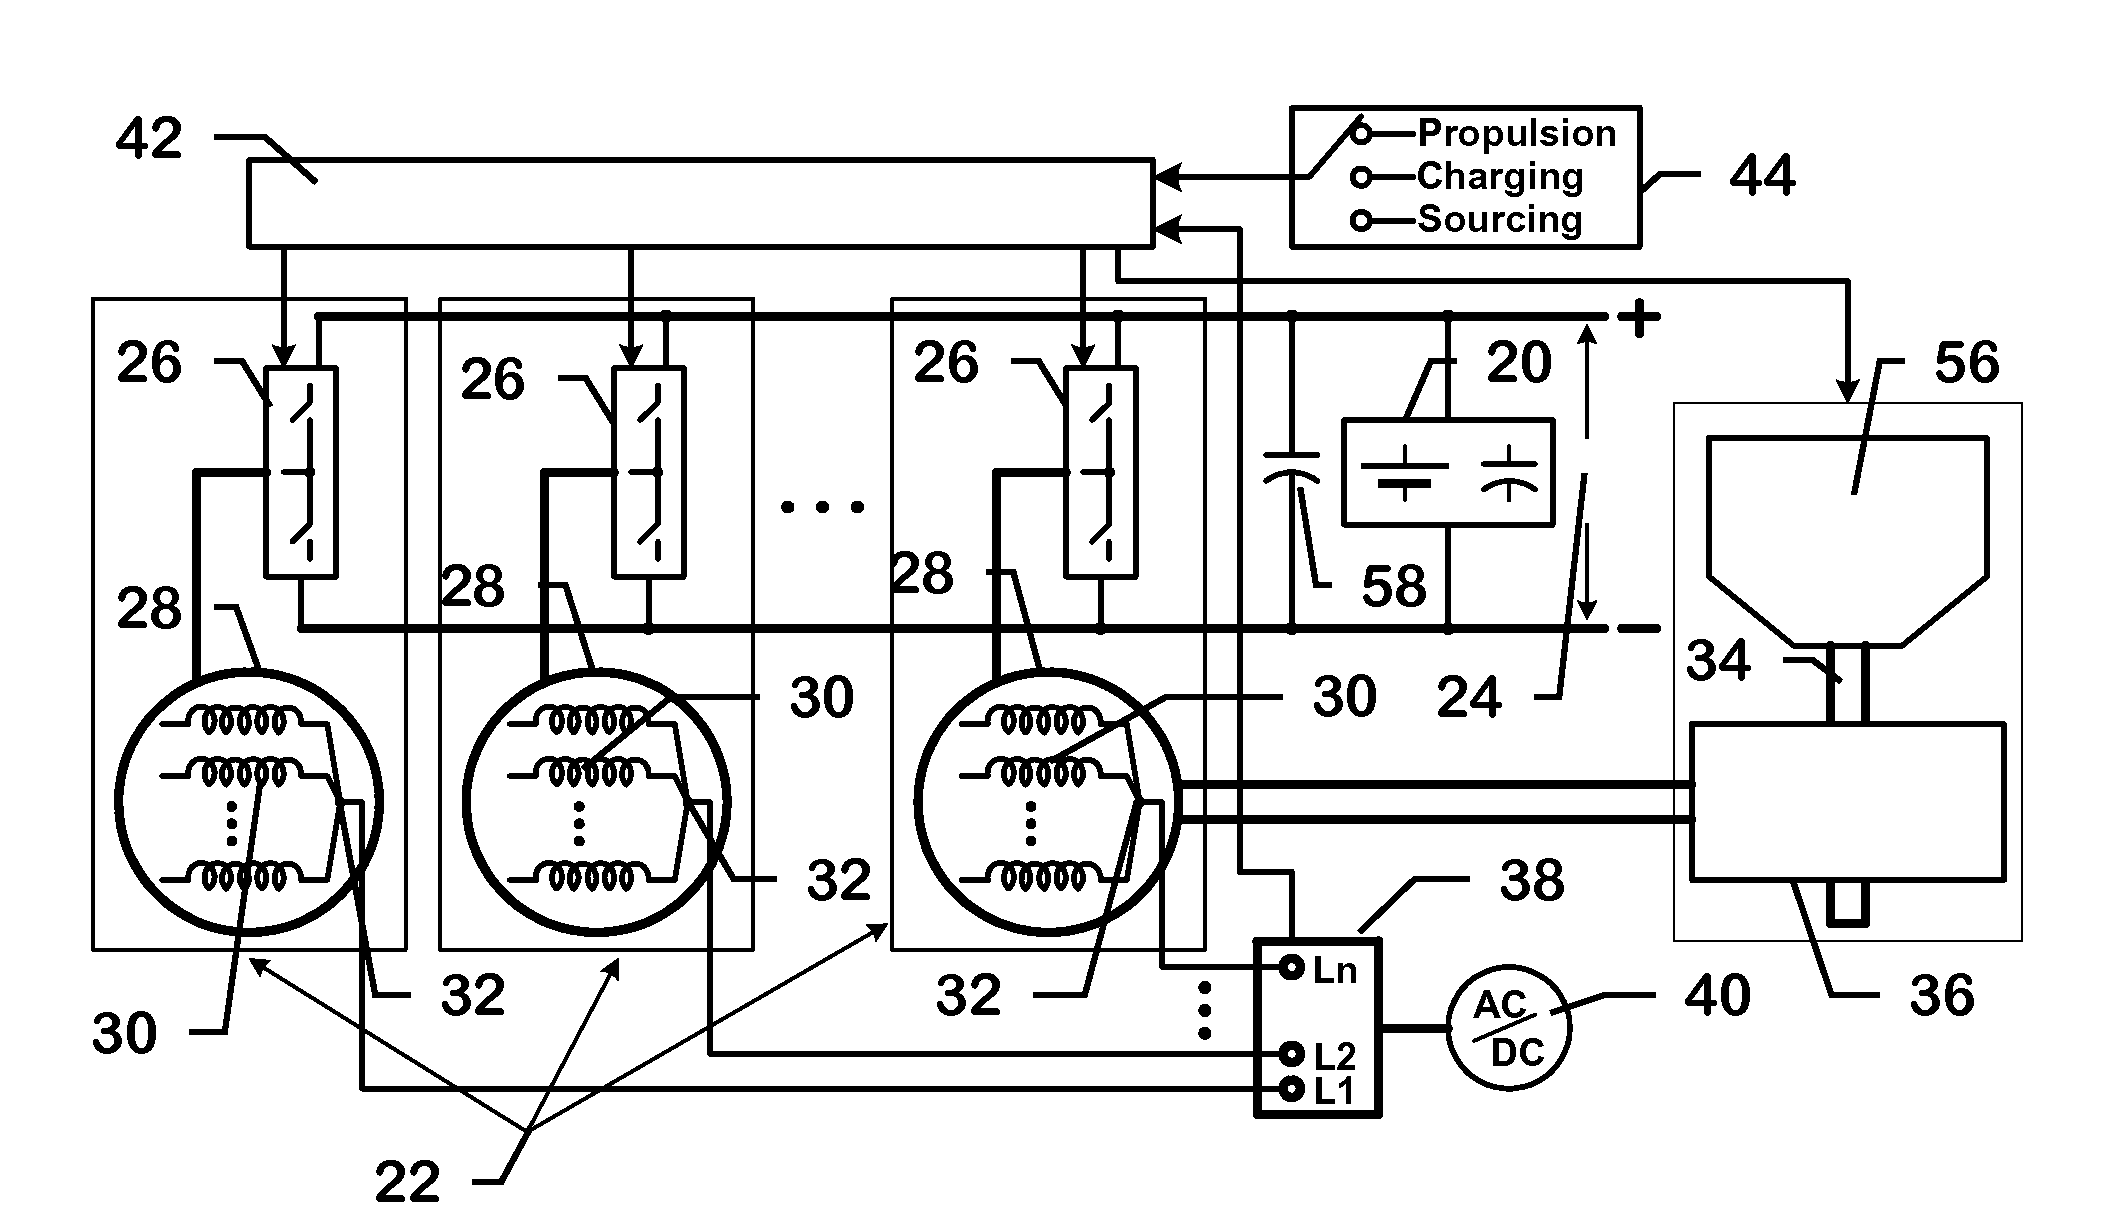 Electric Vehicle System for Charging and Supplying Electrical Power